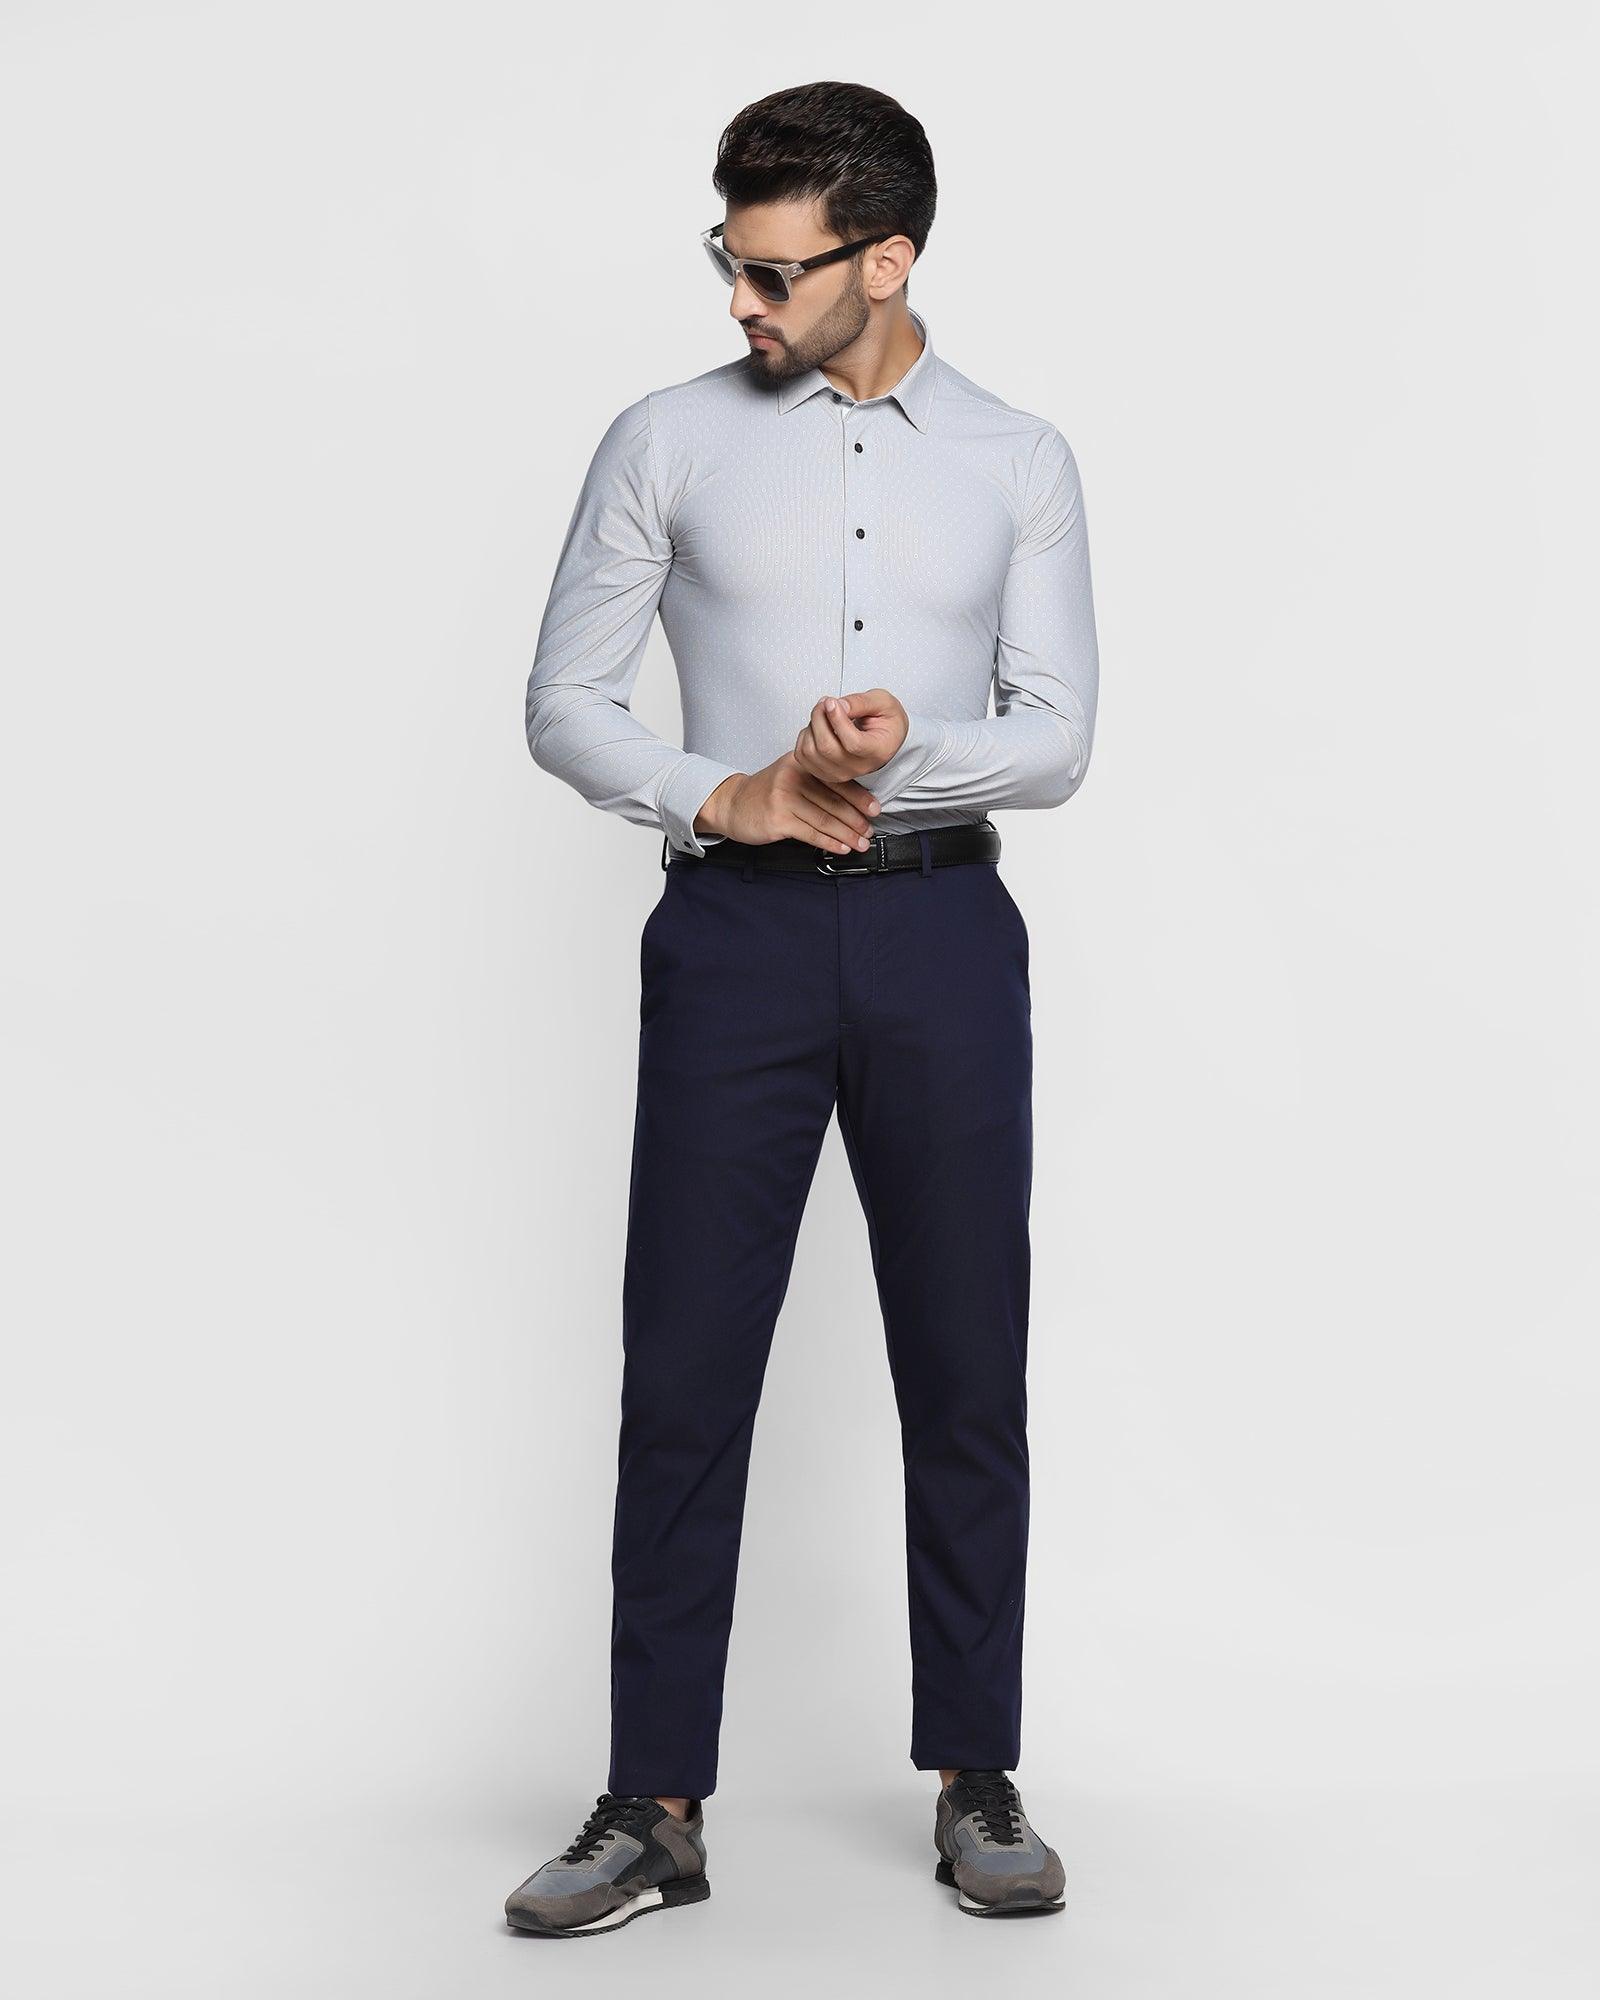 Would you wear a dark blue shirt with grey pants? - Quora